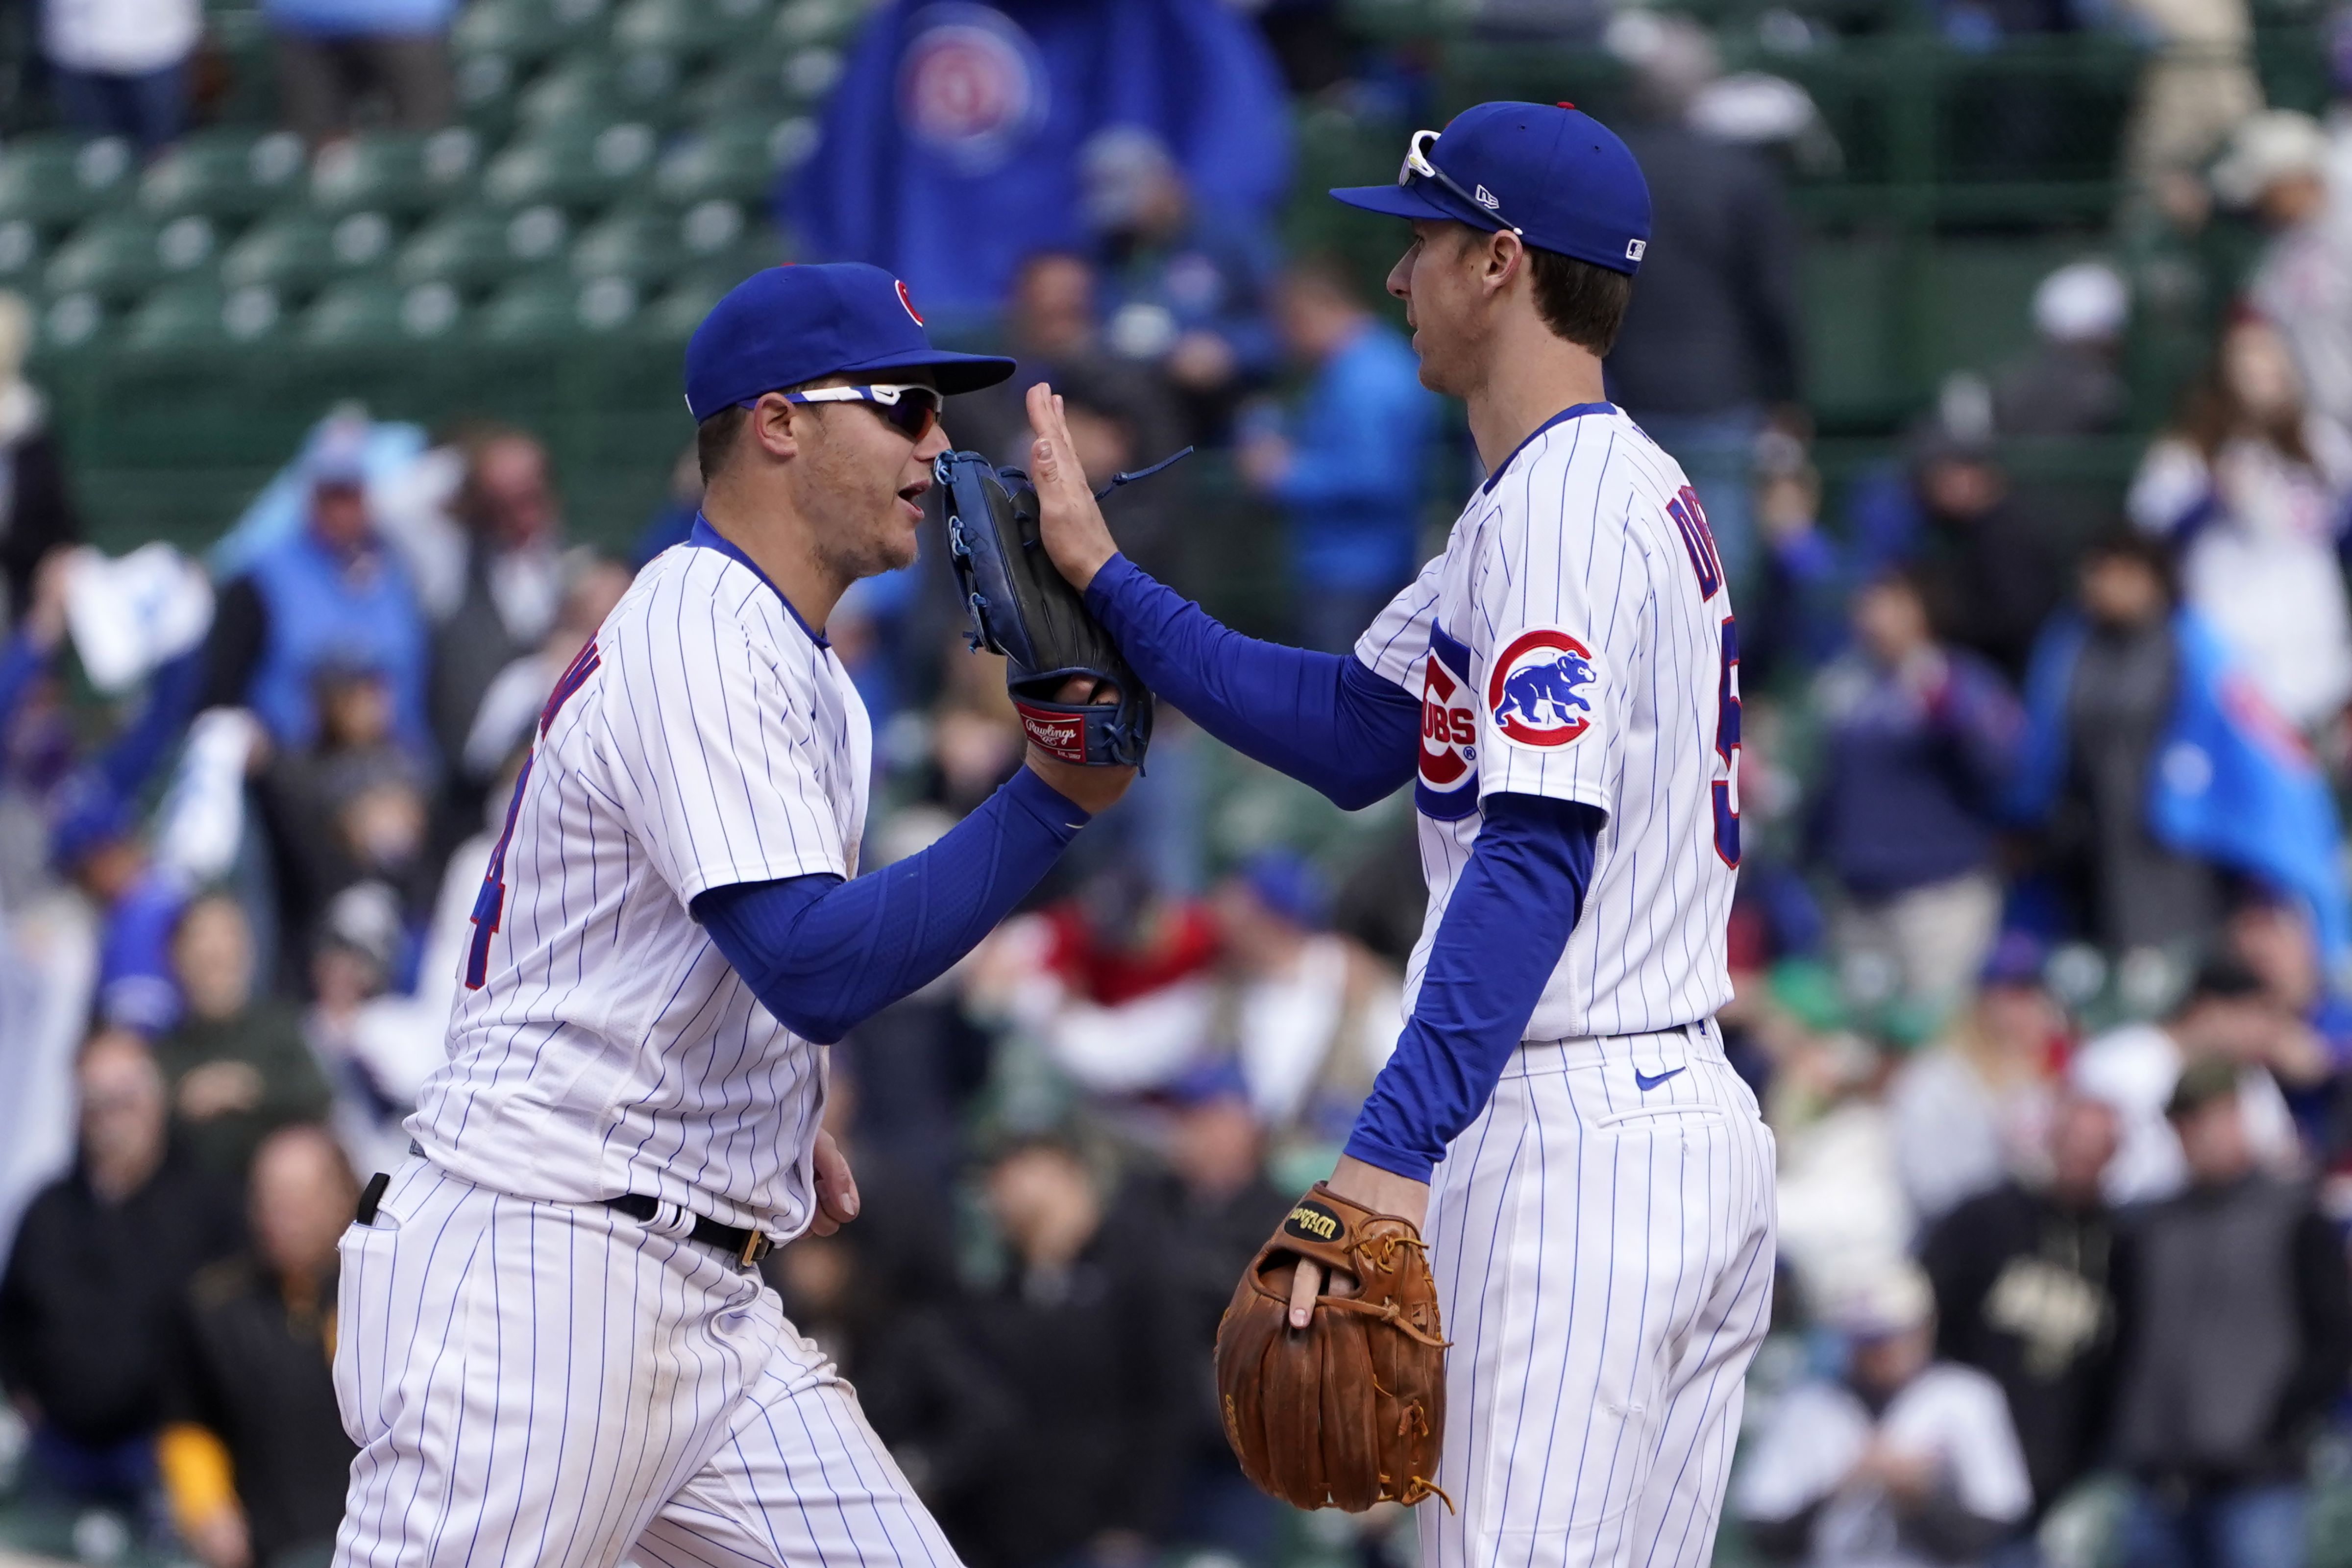 Davies, Pederson lead Cubs over Pirates 3-2, 4th win in row